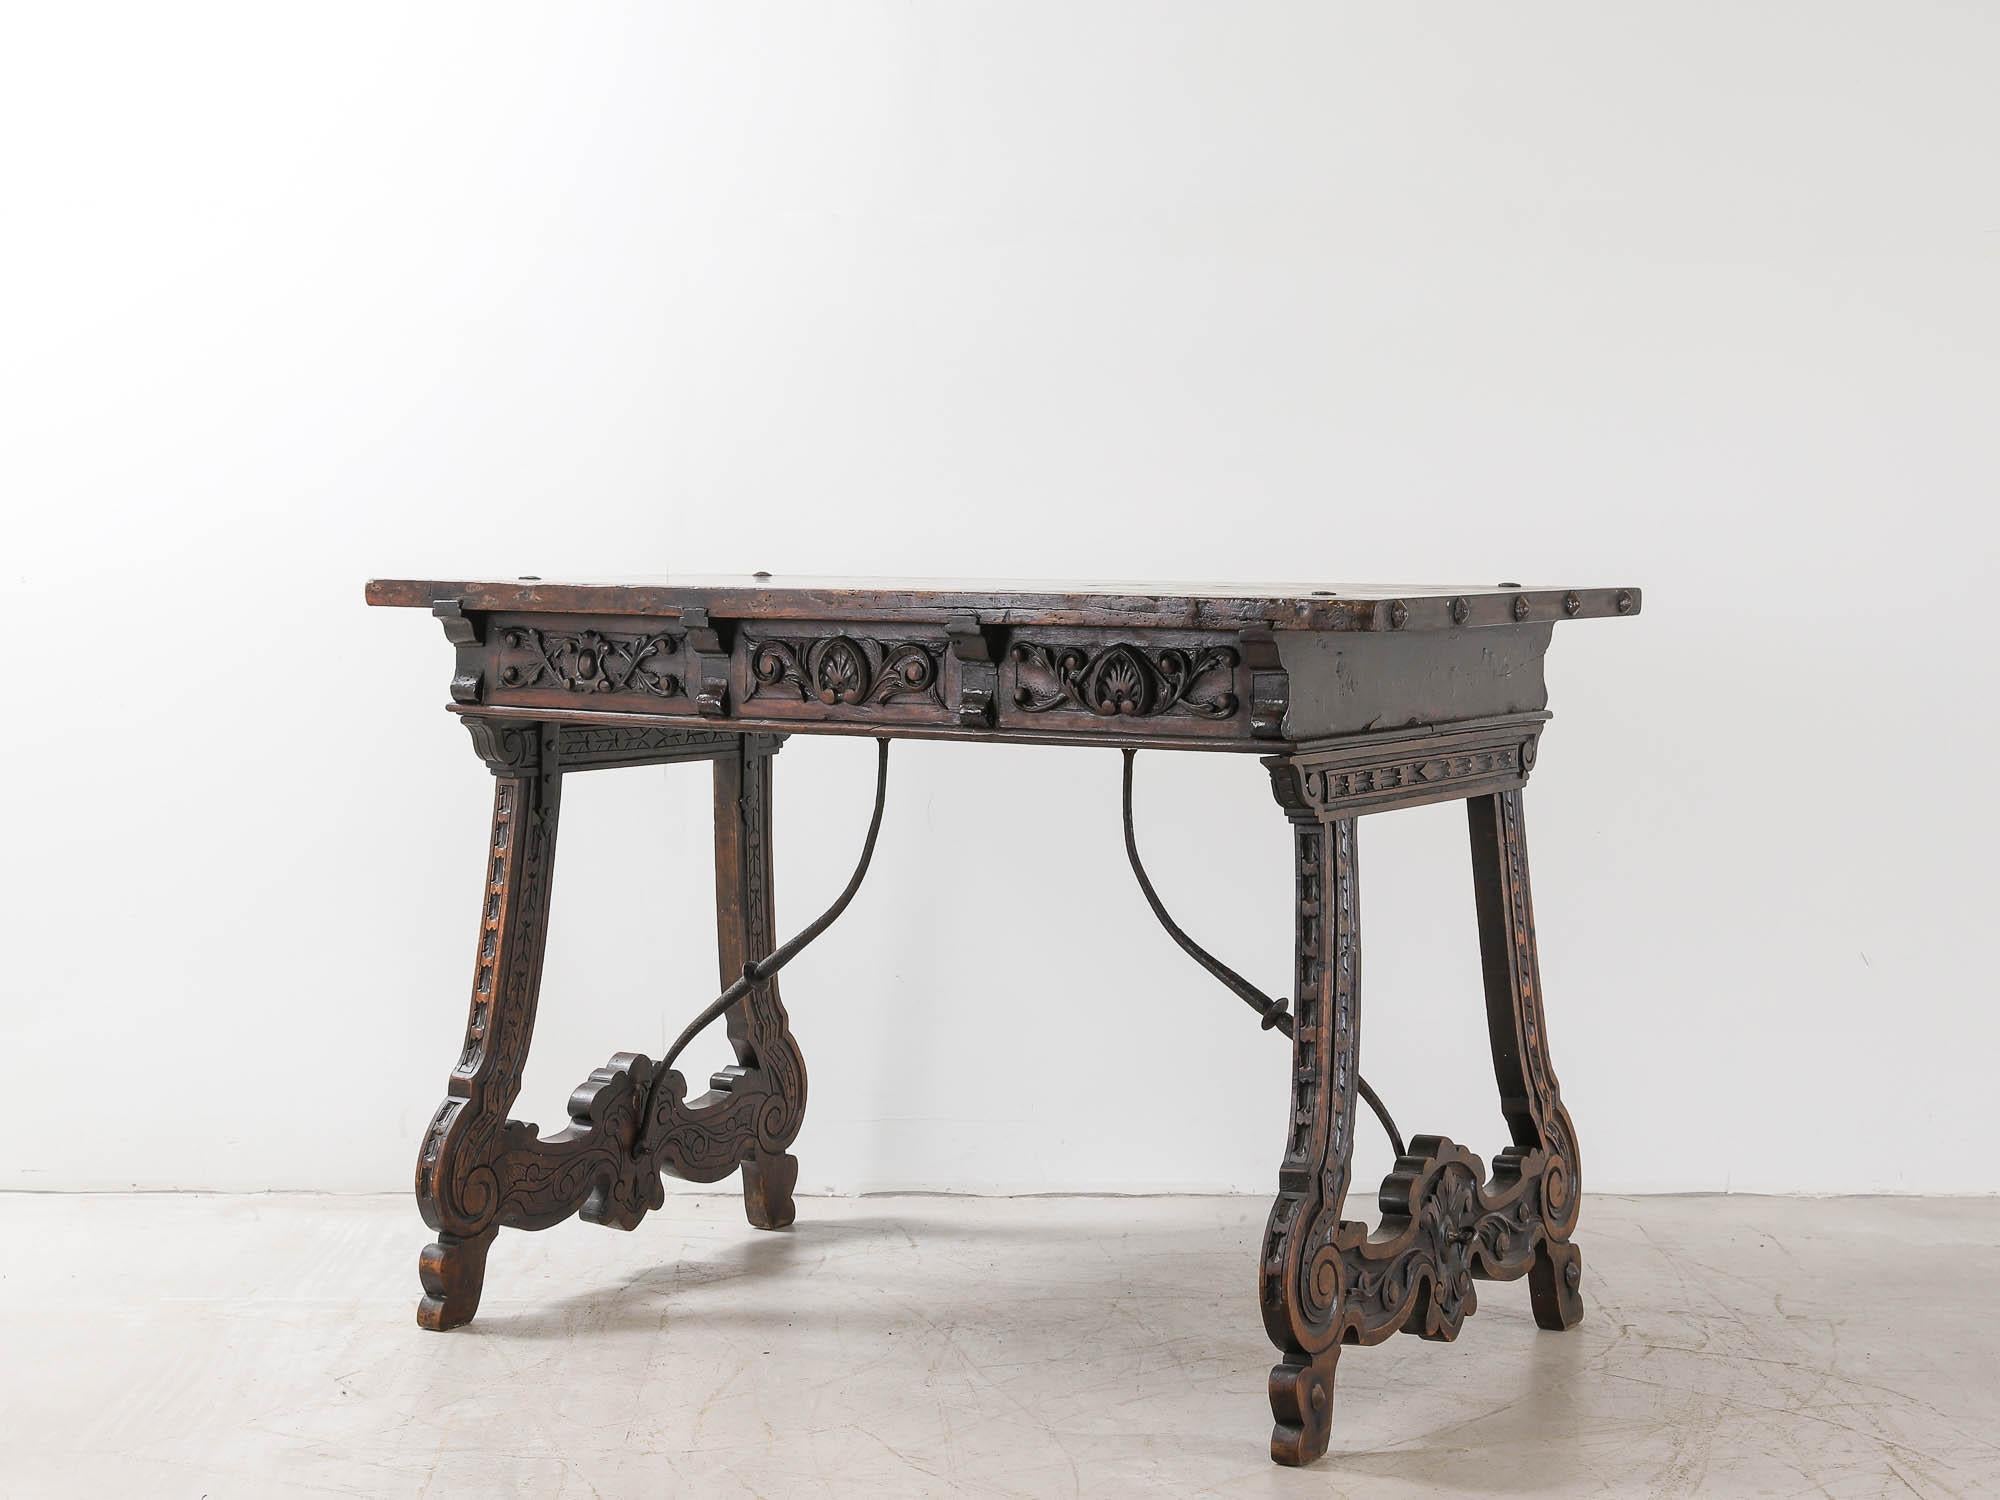 An ornately carved Spanish 19th century Neo-Renaissance table in dark chestnut. With a beautifully patinated top with iron rivets securing it to a three drawer frieze with floral carving and velvet backed iron drawer pulls. Sitting on carved trestle